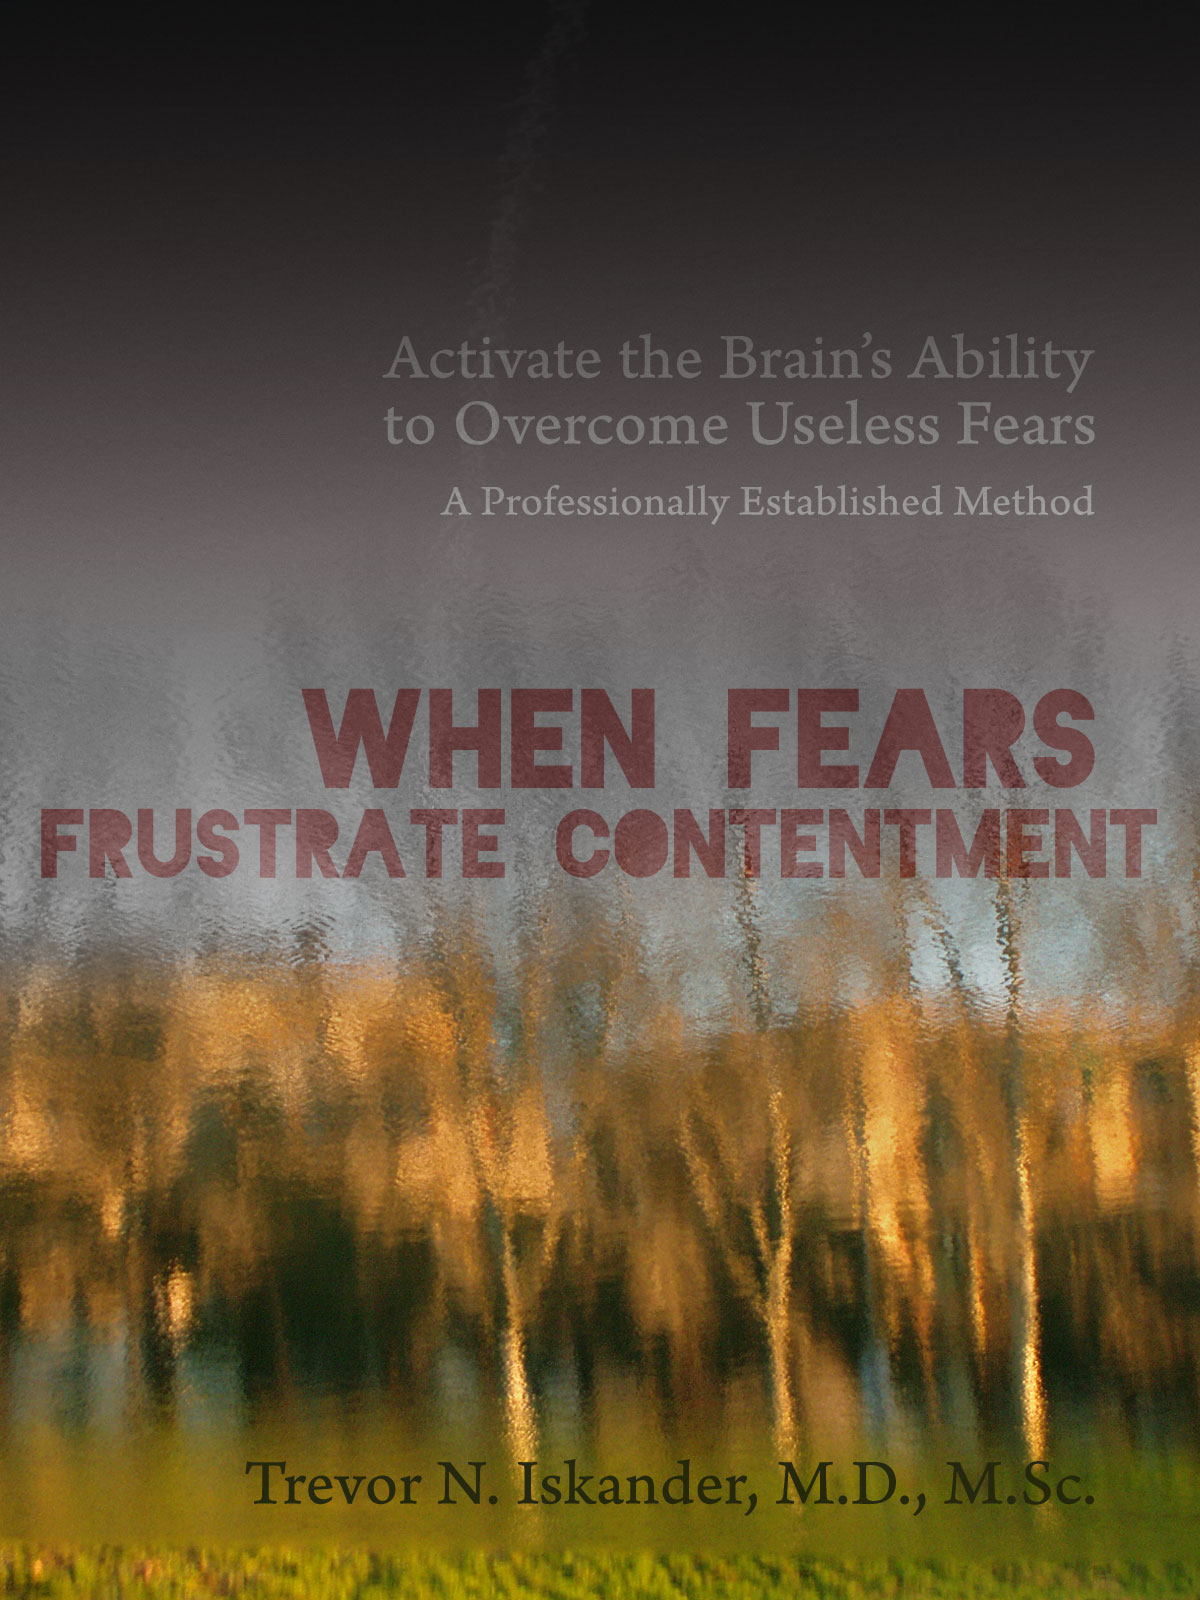 When Fears Frustrate Contentment by Trevor Iskander